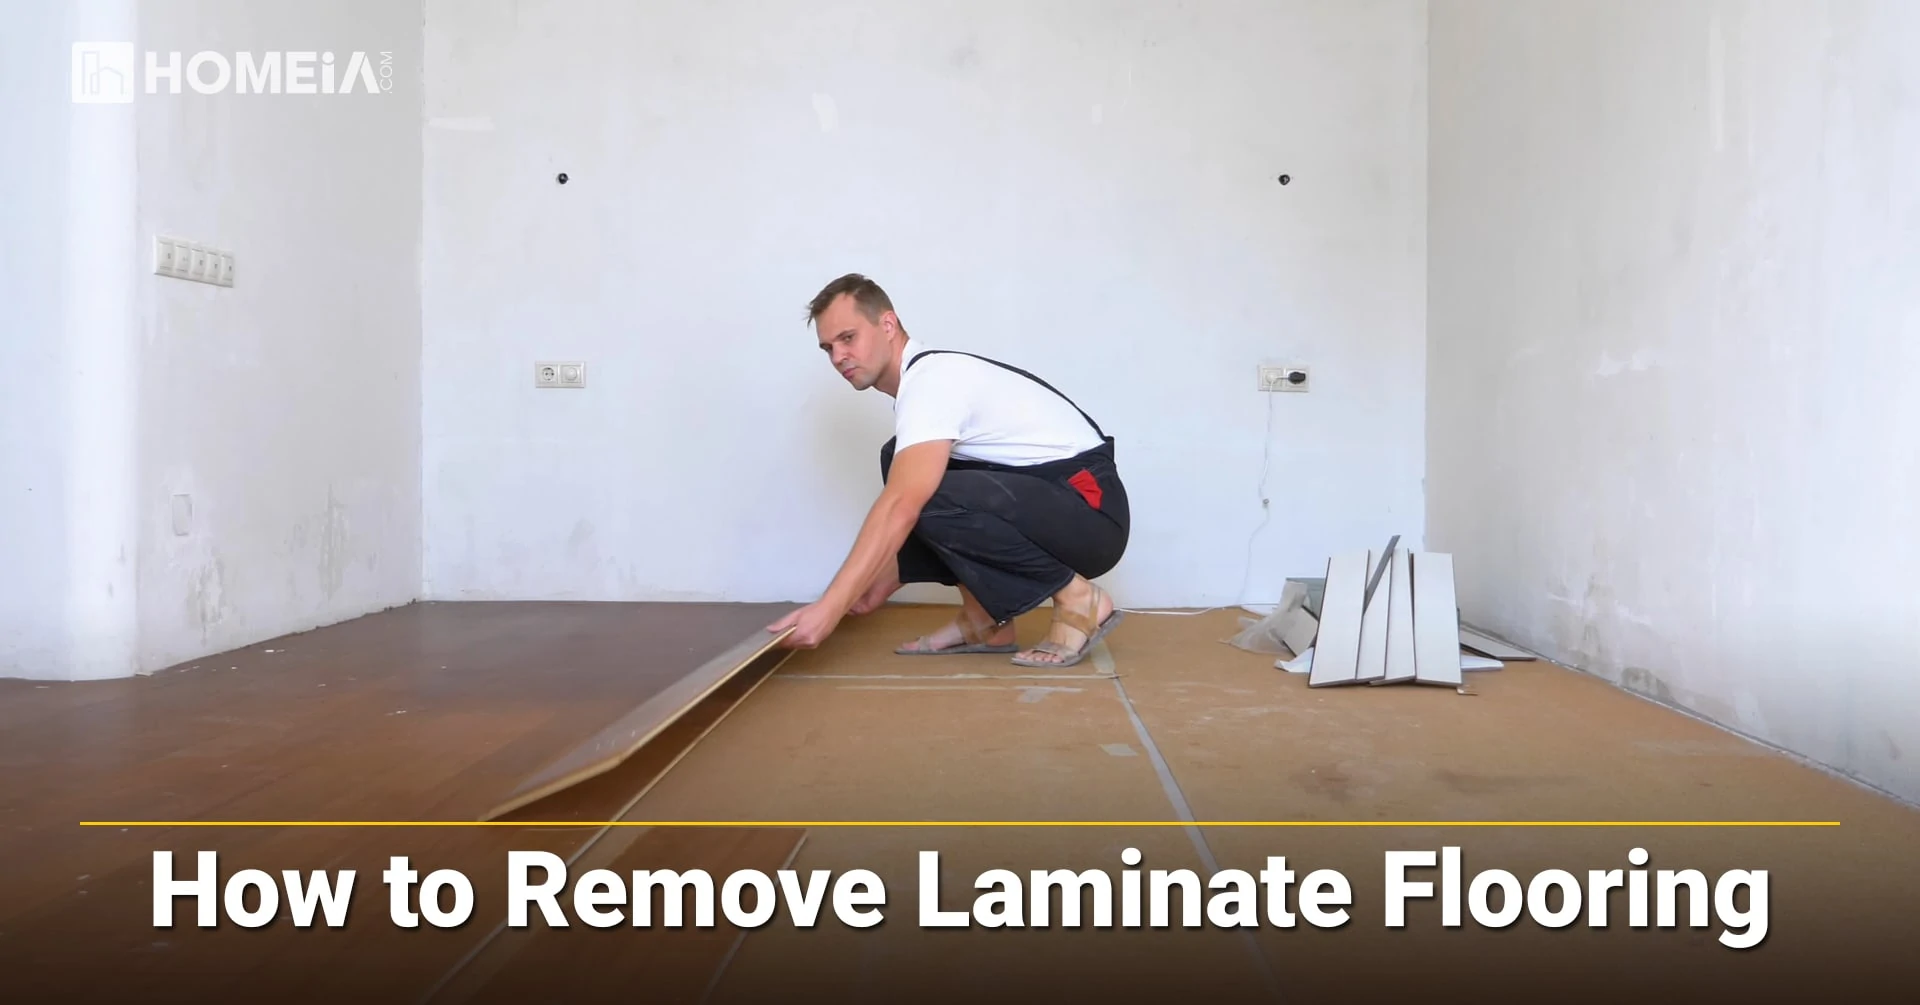 10 Steps to Remove Laminate Flooring